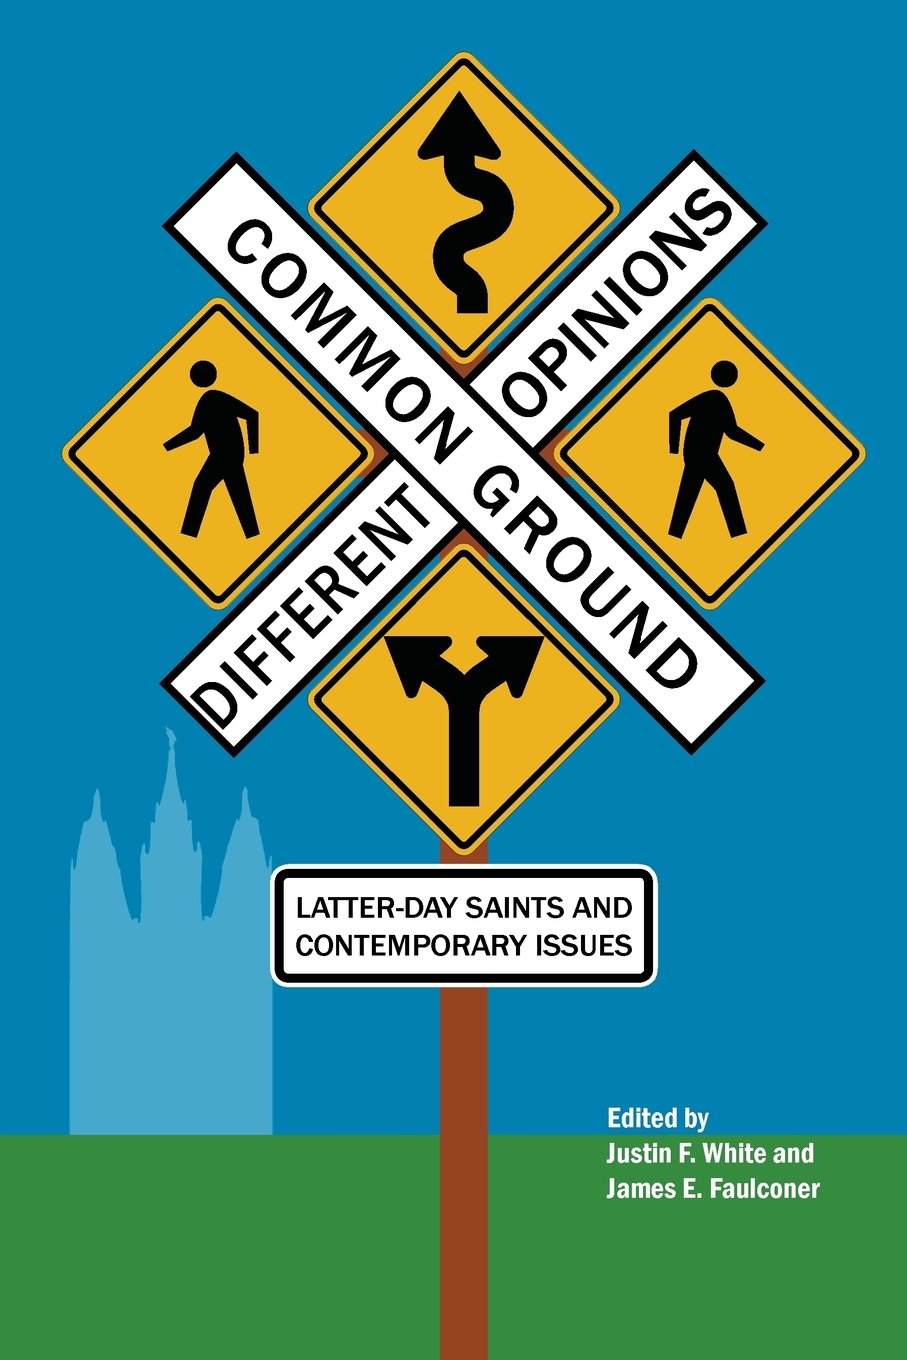 Common Ground-Different Opinions: Latter-day Saints and Contemporary Issues